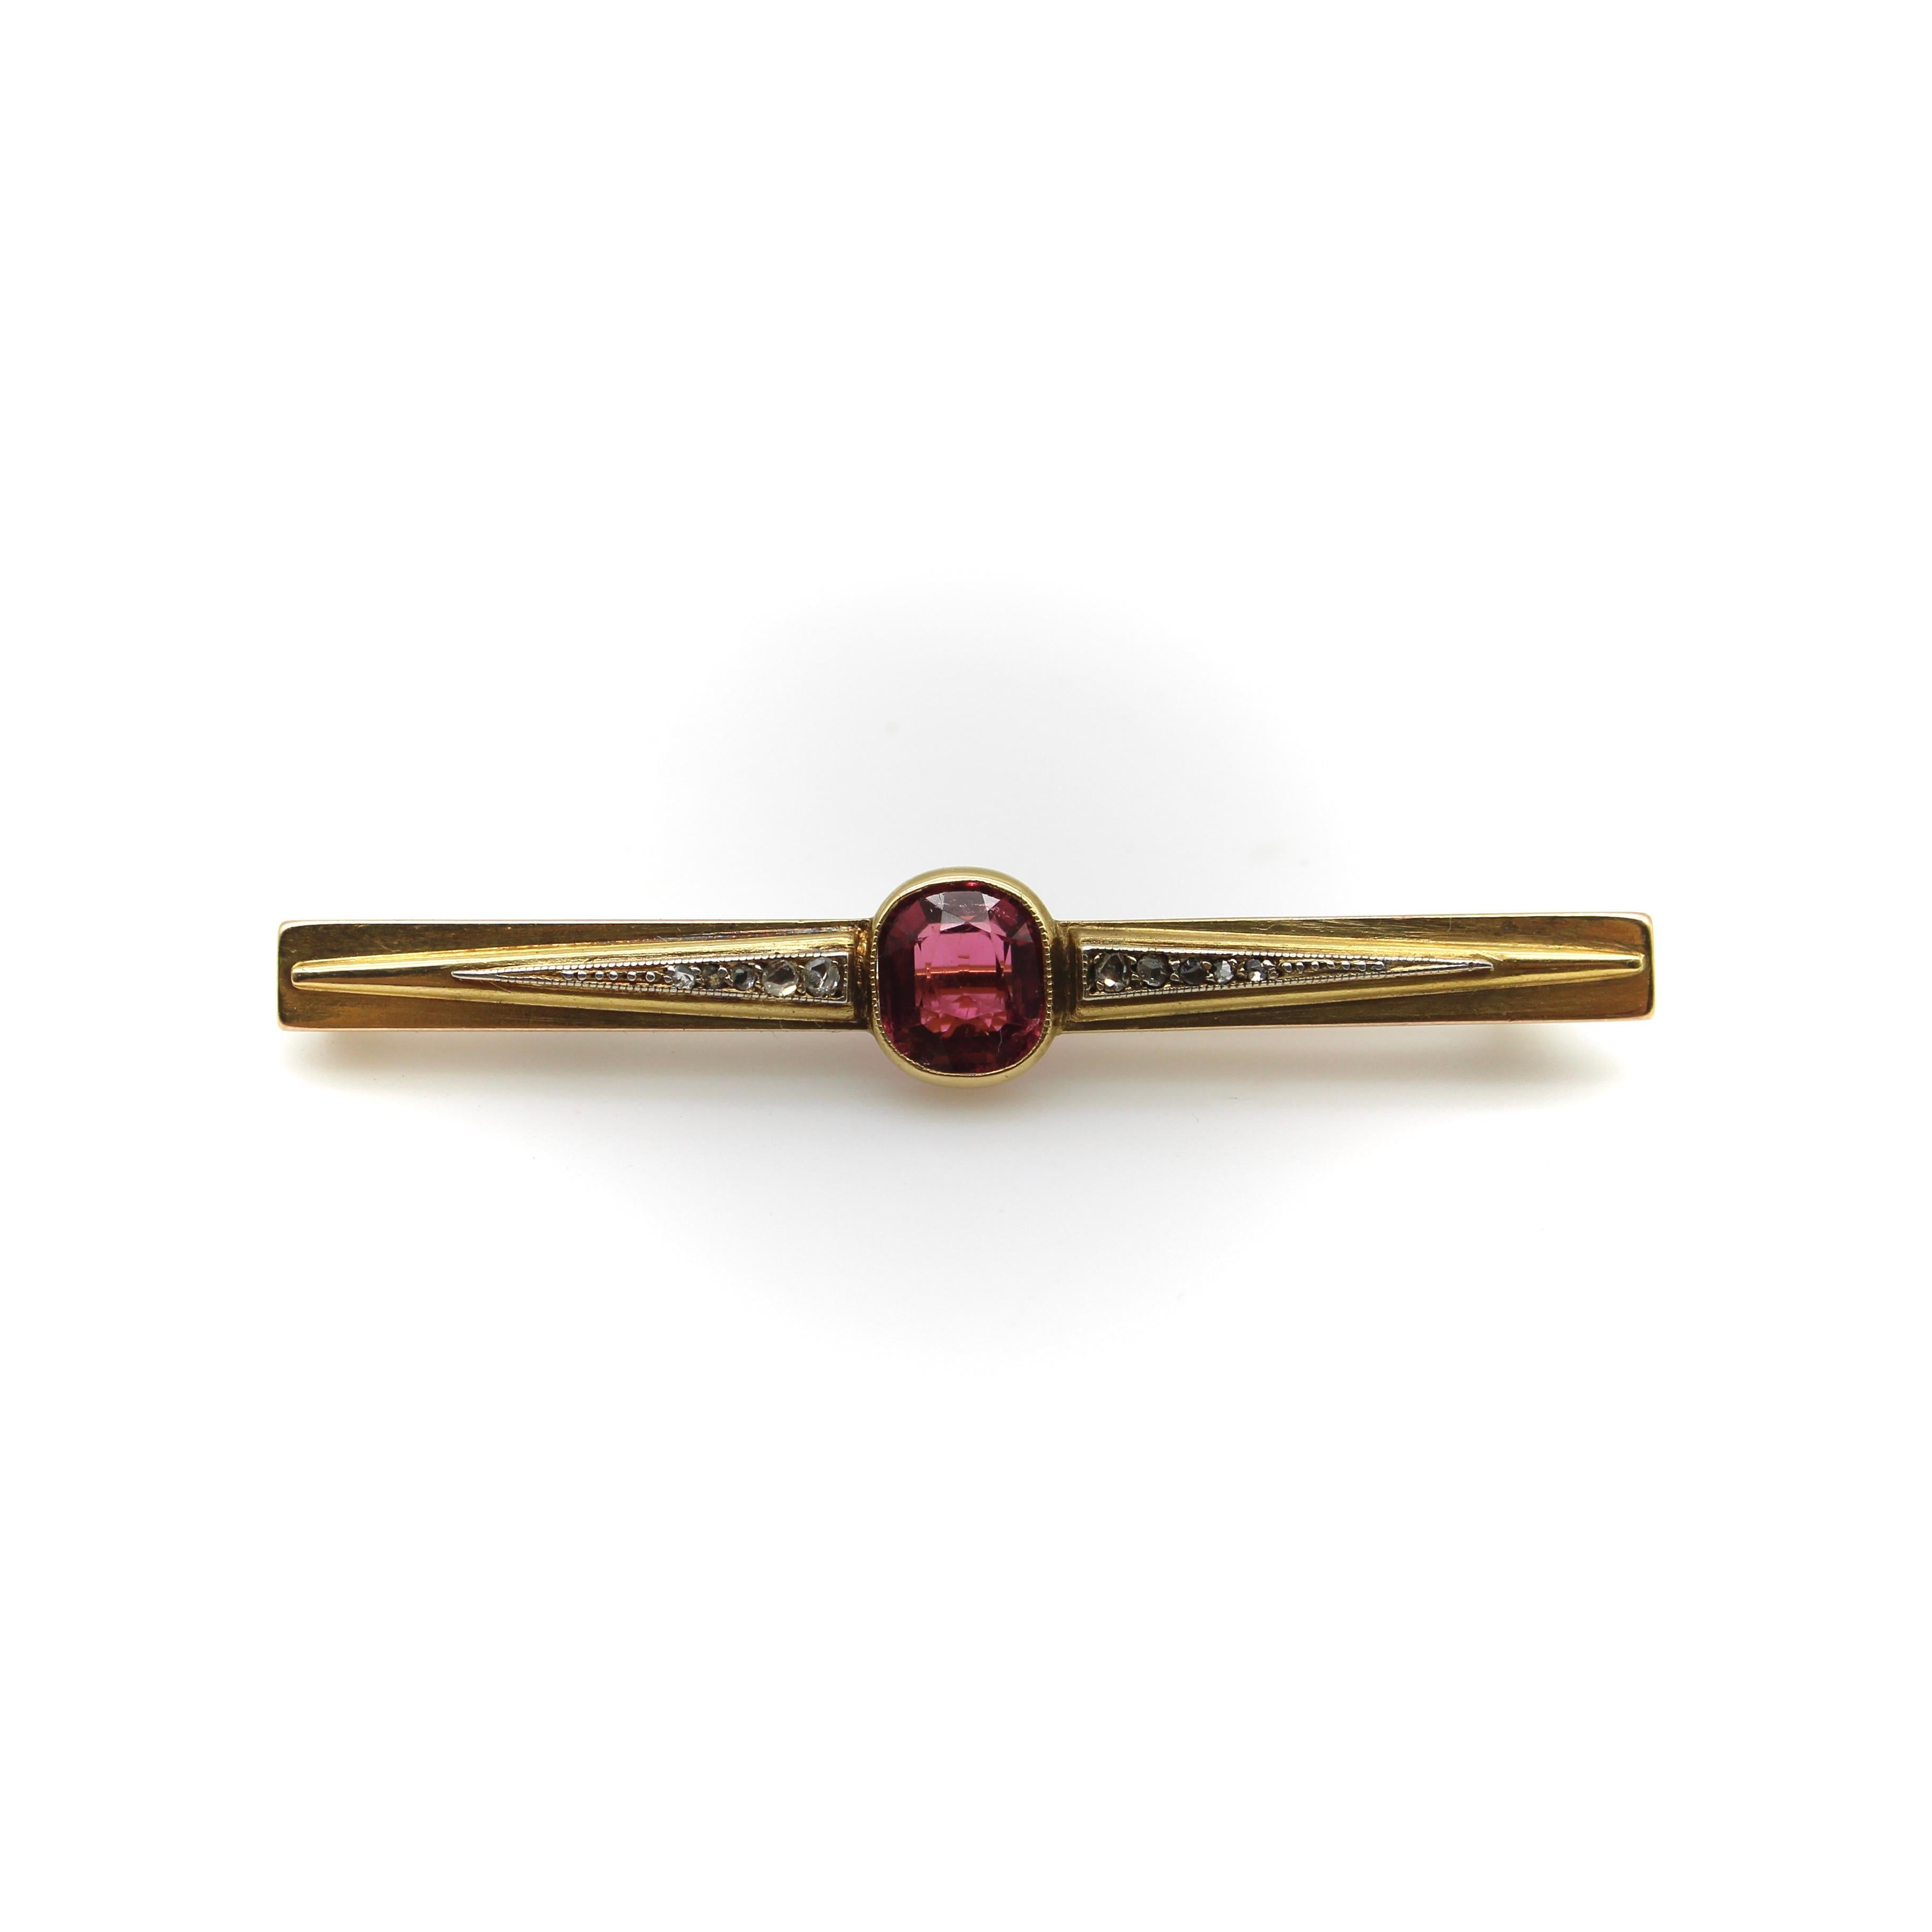 Circa 1870, this gorgeous French brooch features a pink tourmaline as its centerpiece, flanked by Rose Cut diamond studded triangles along a horizontal 18k gold pin. The tourmaline is oval-shaped and bezel set—it is a nice old cut stone with complex